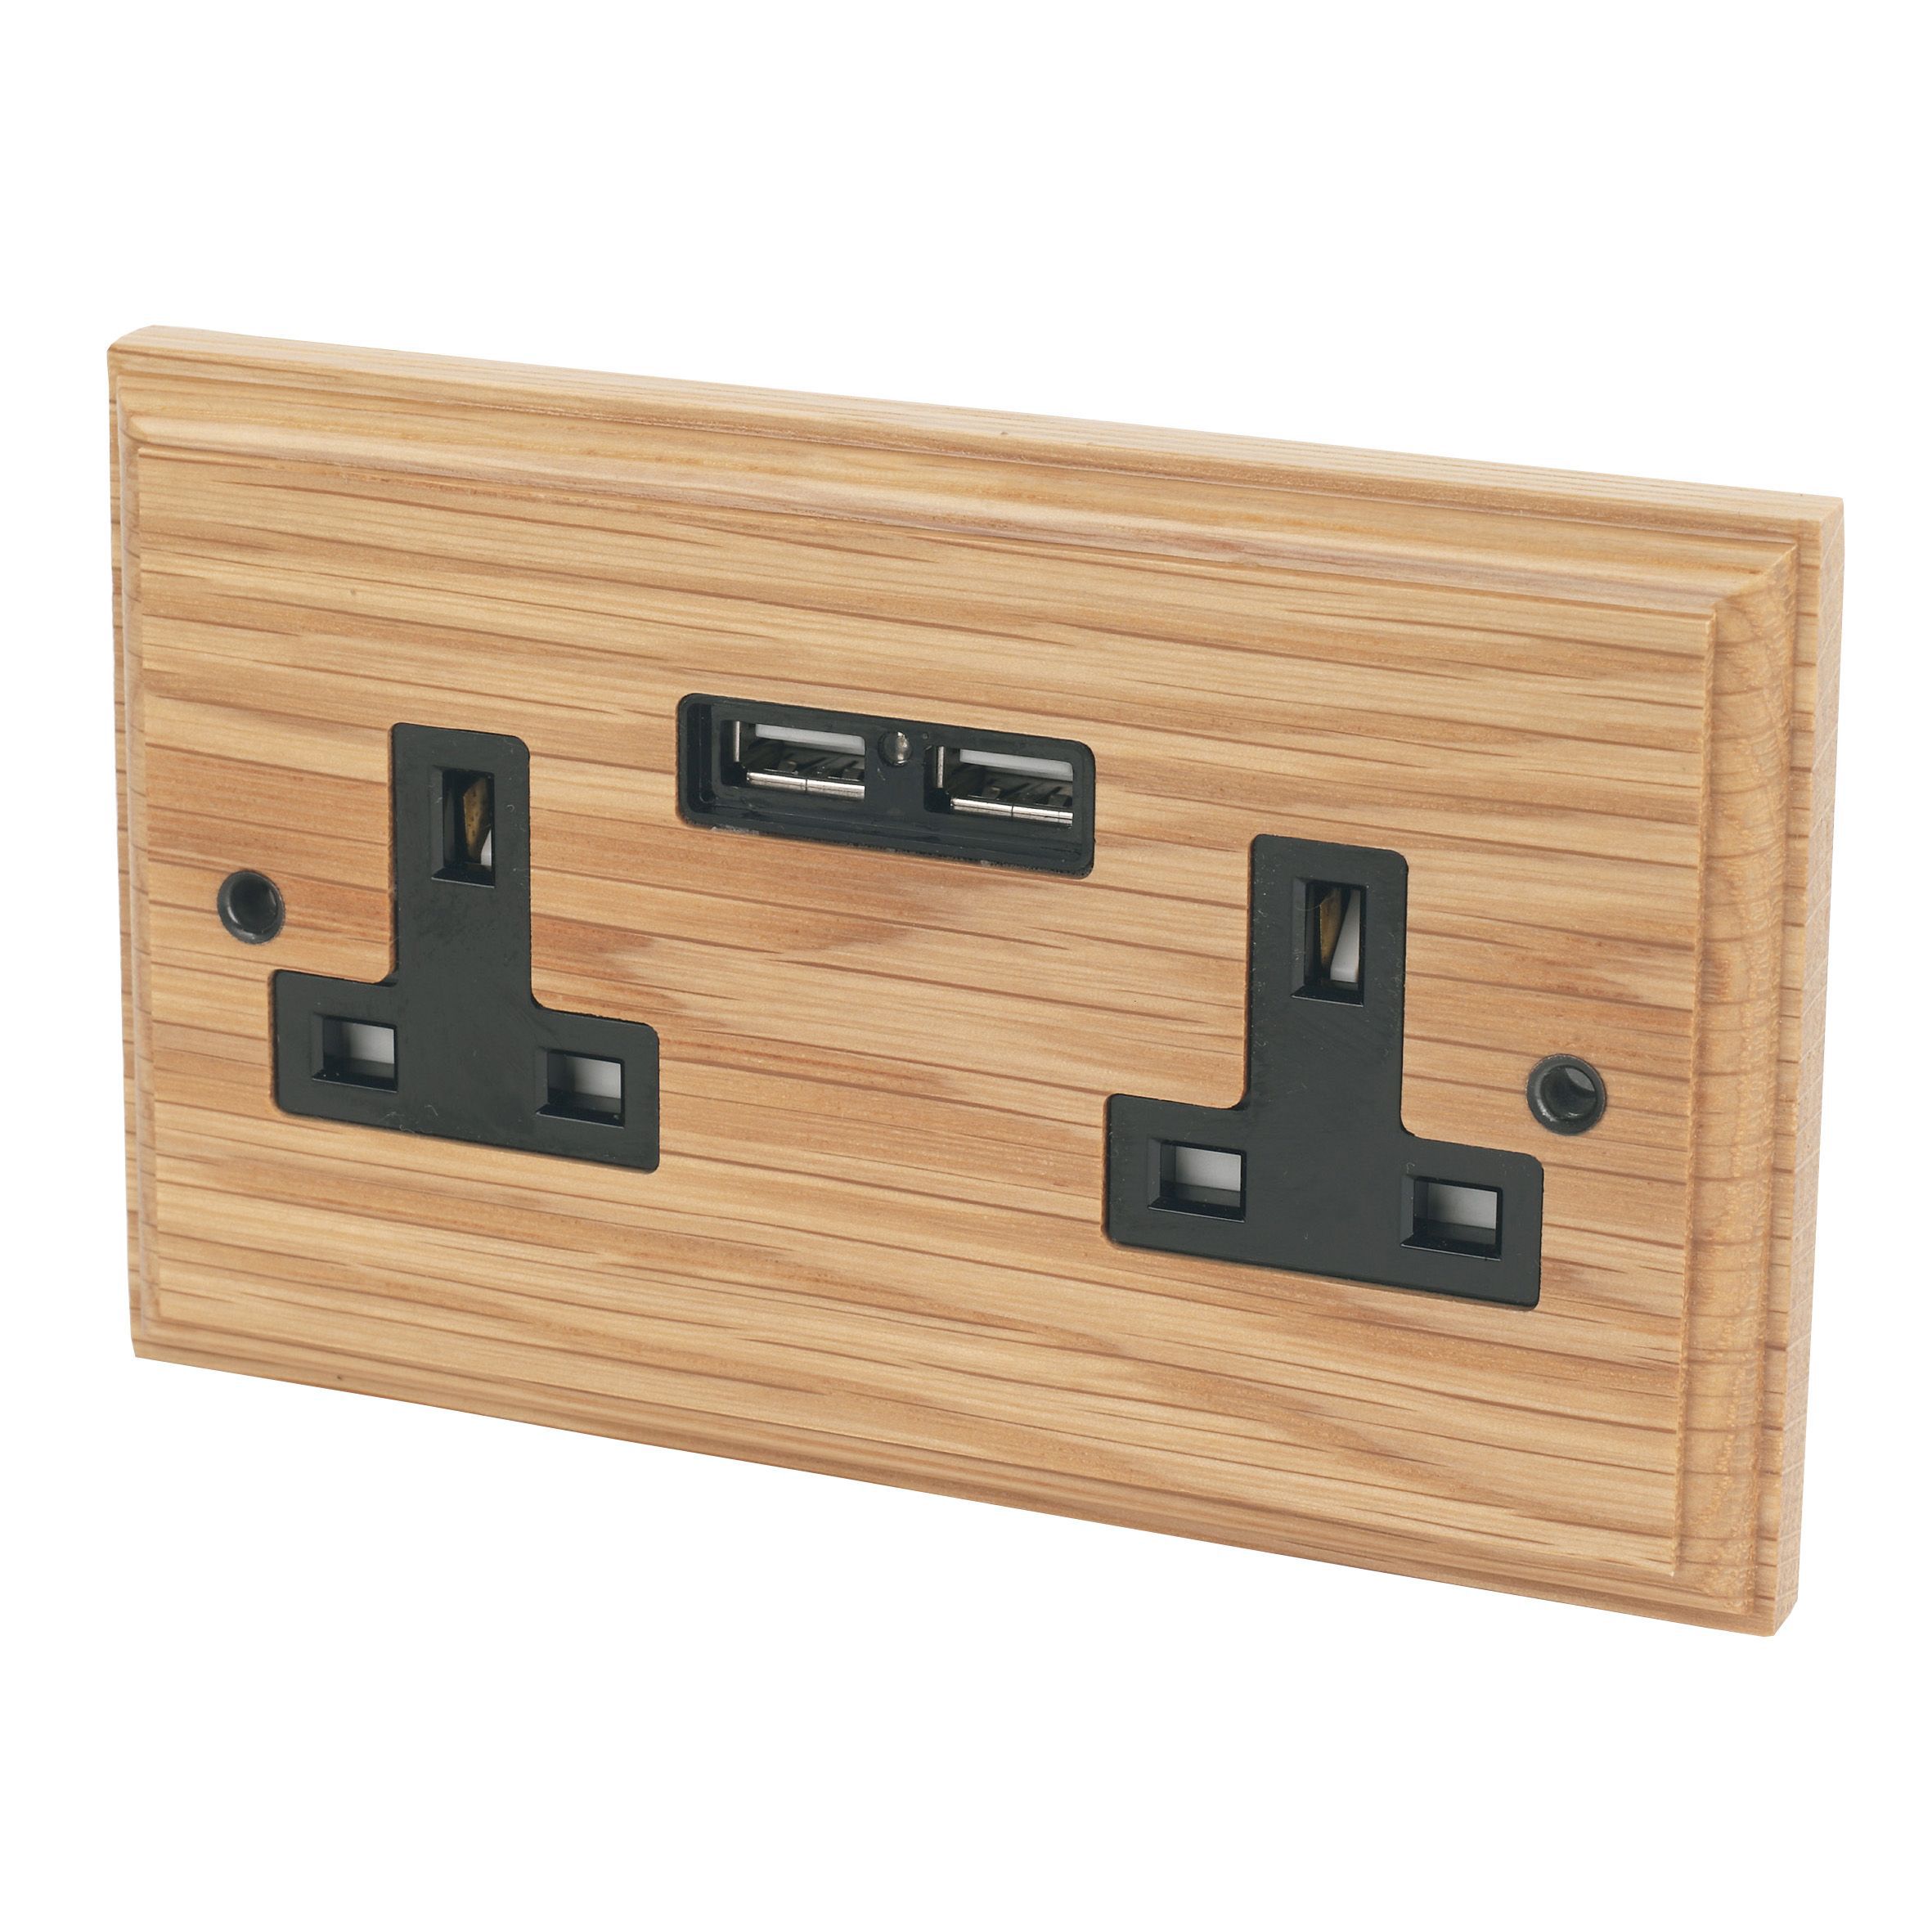 Varilight Oak Double 13A Unswitched USB socket, x2and Black inserts